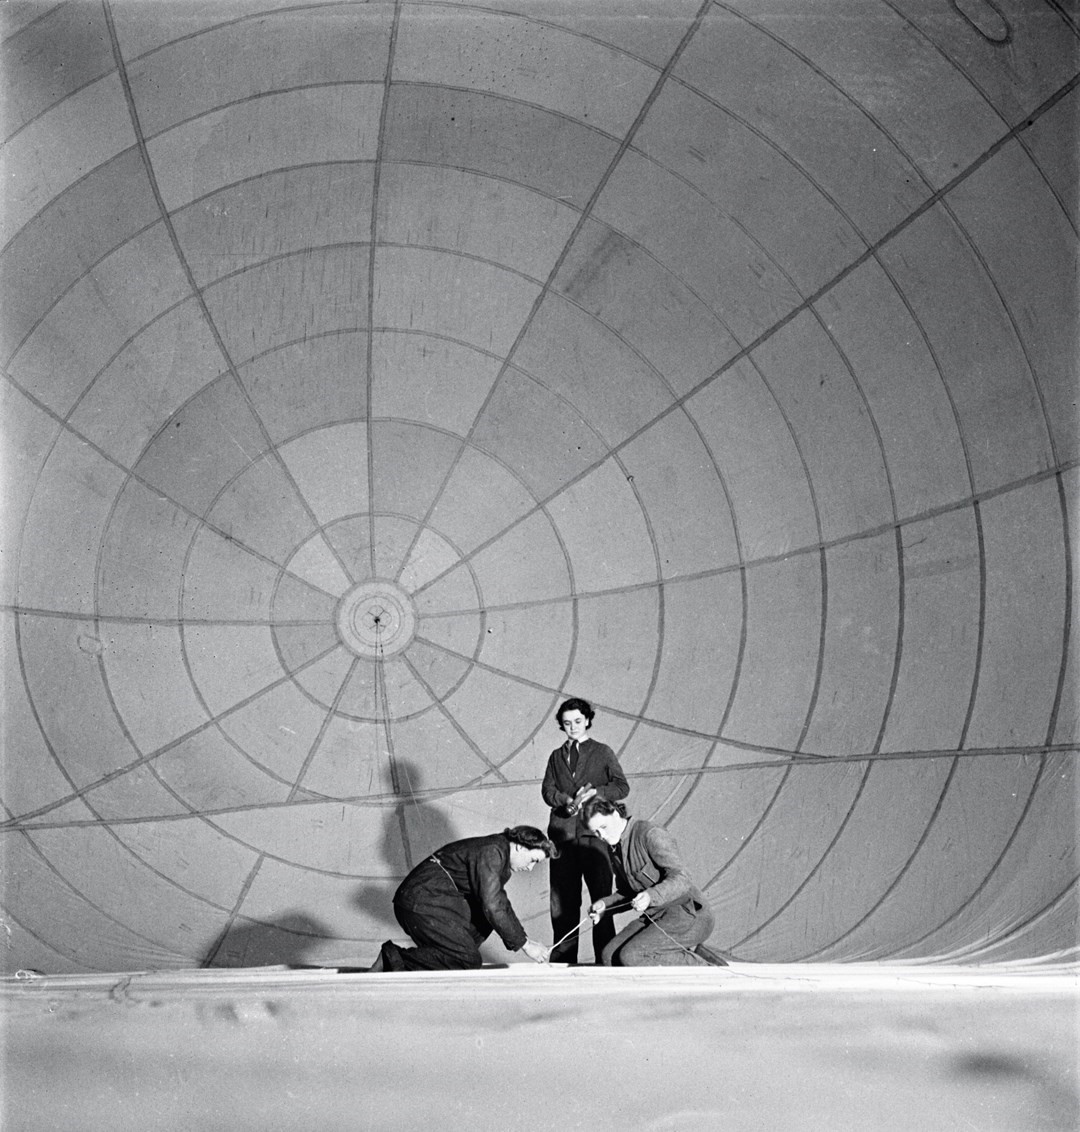 Women Working on the Barrage Balloon, 1941, by Cecil Beaton